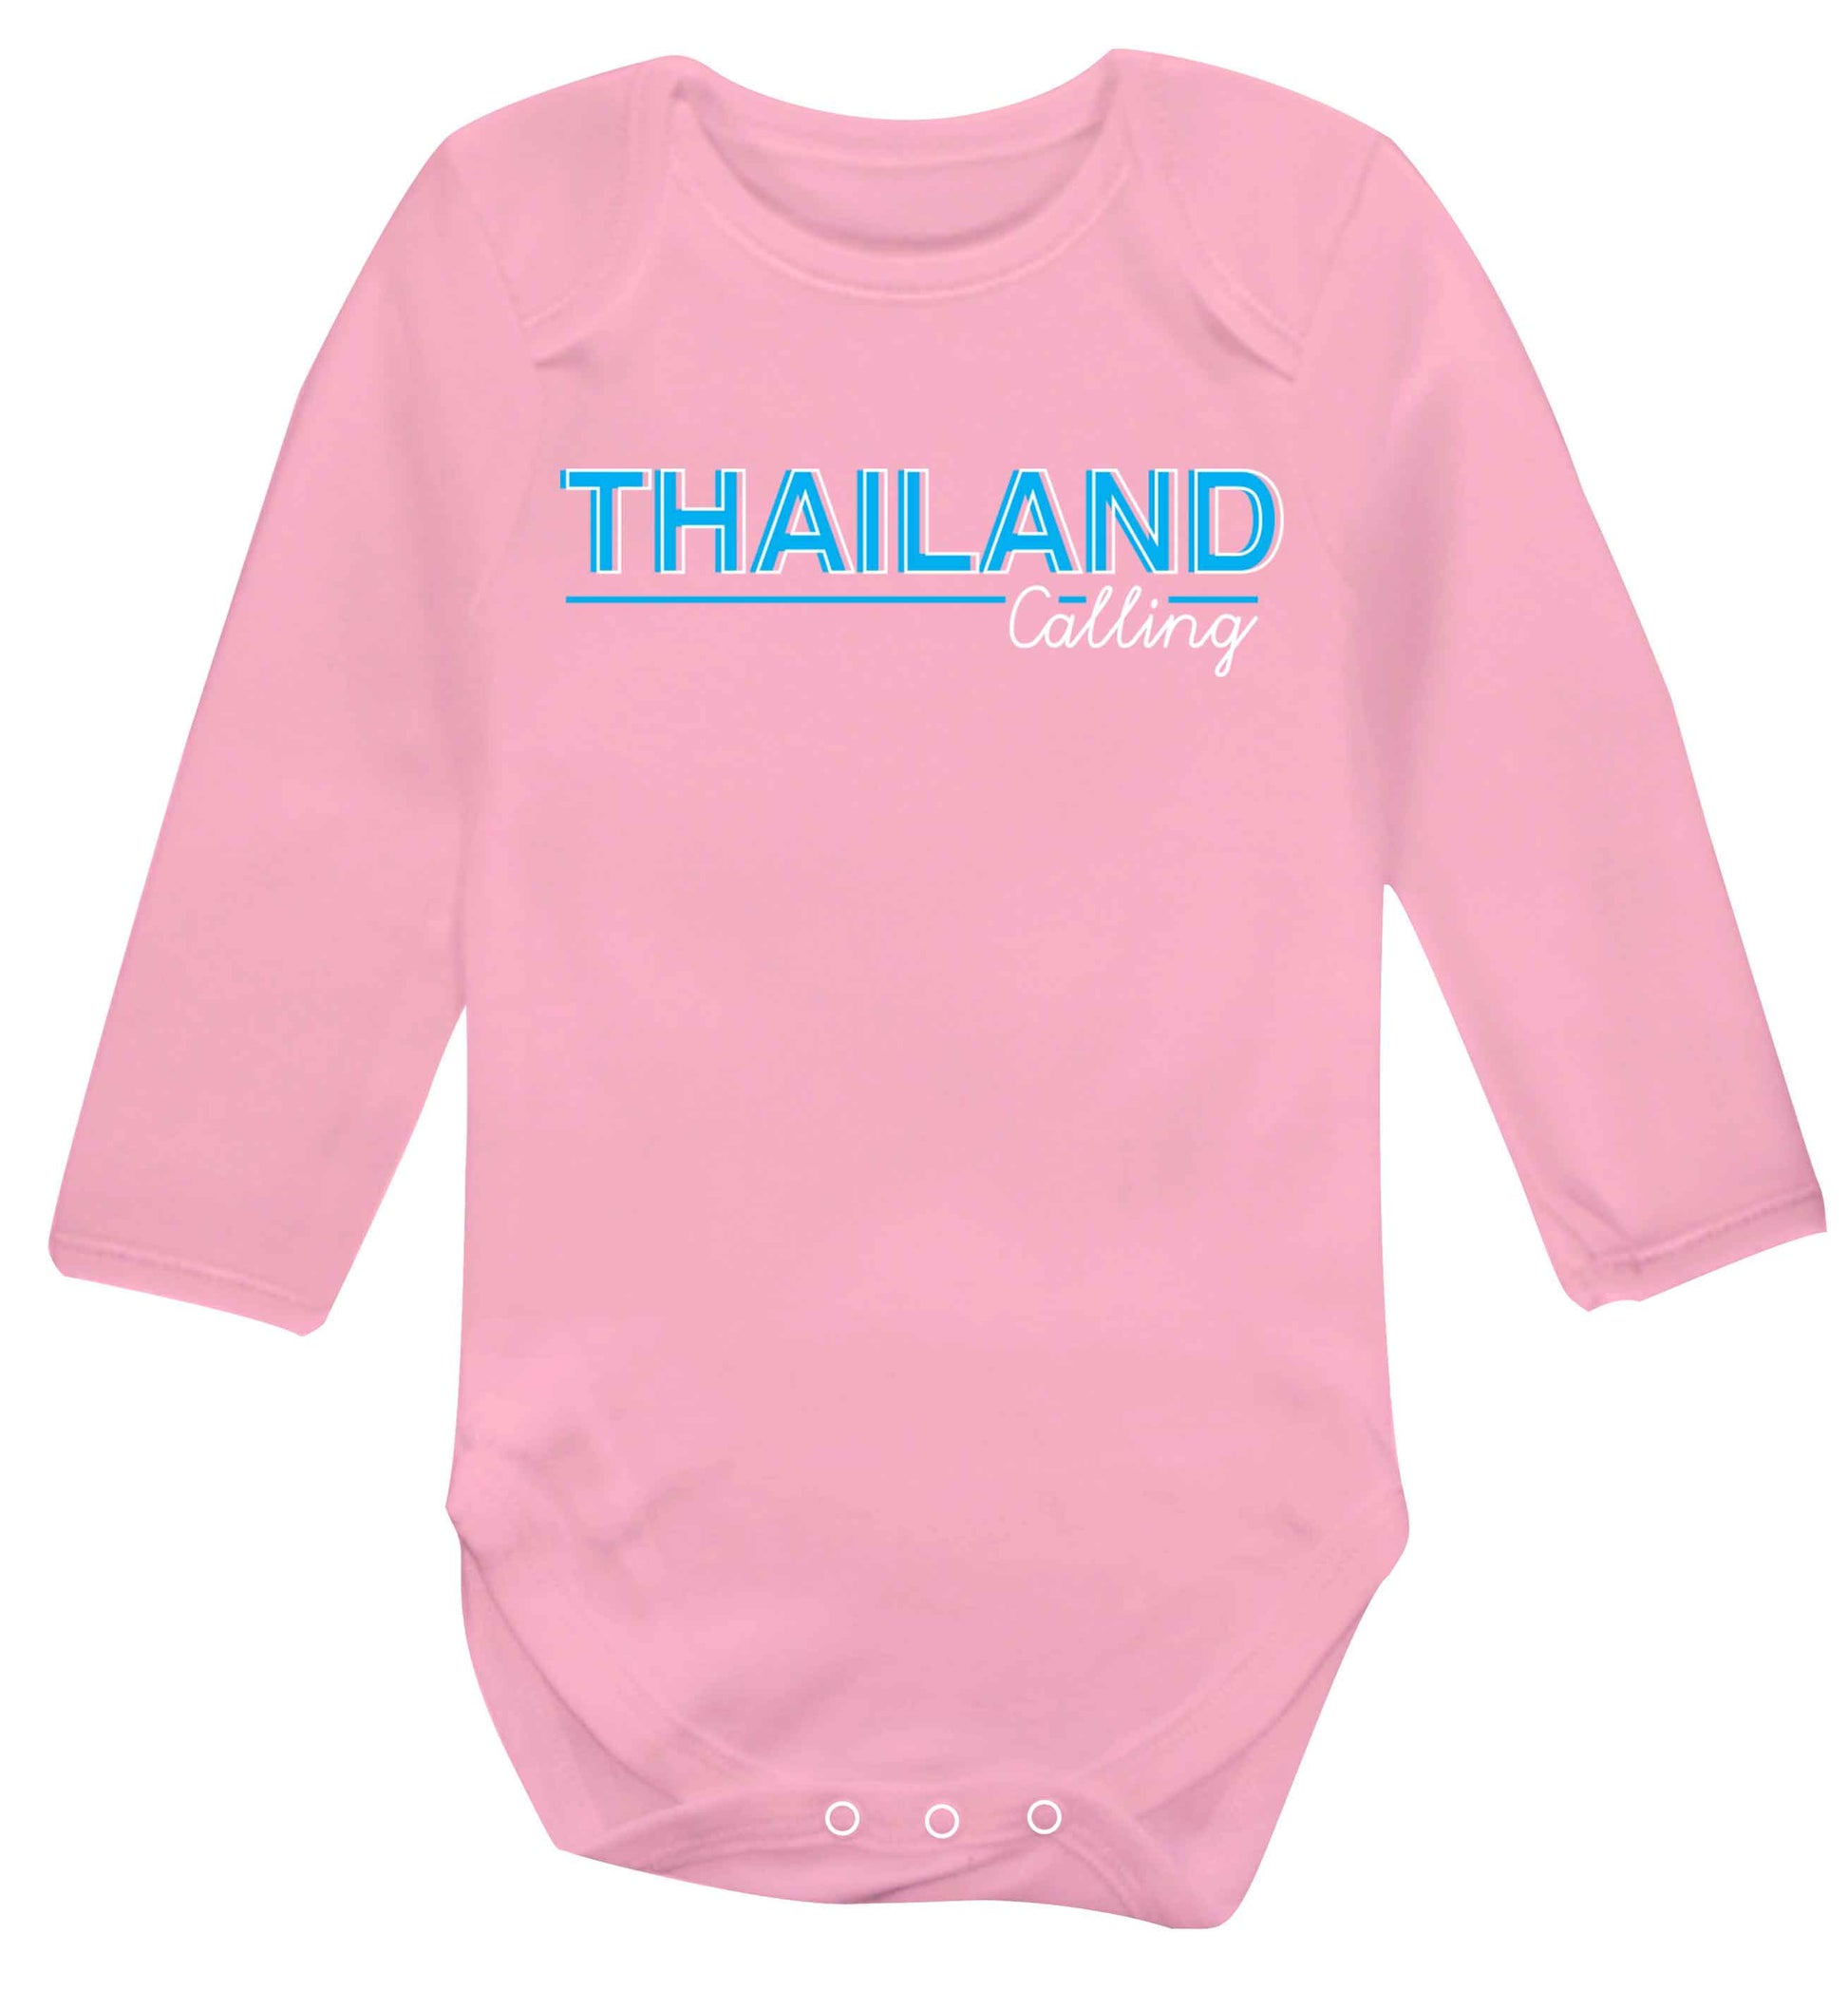 Thailand calling Baby Vest long sleeved pale pink 6-12 months